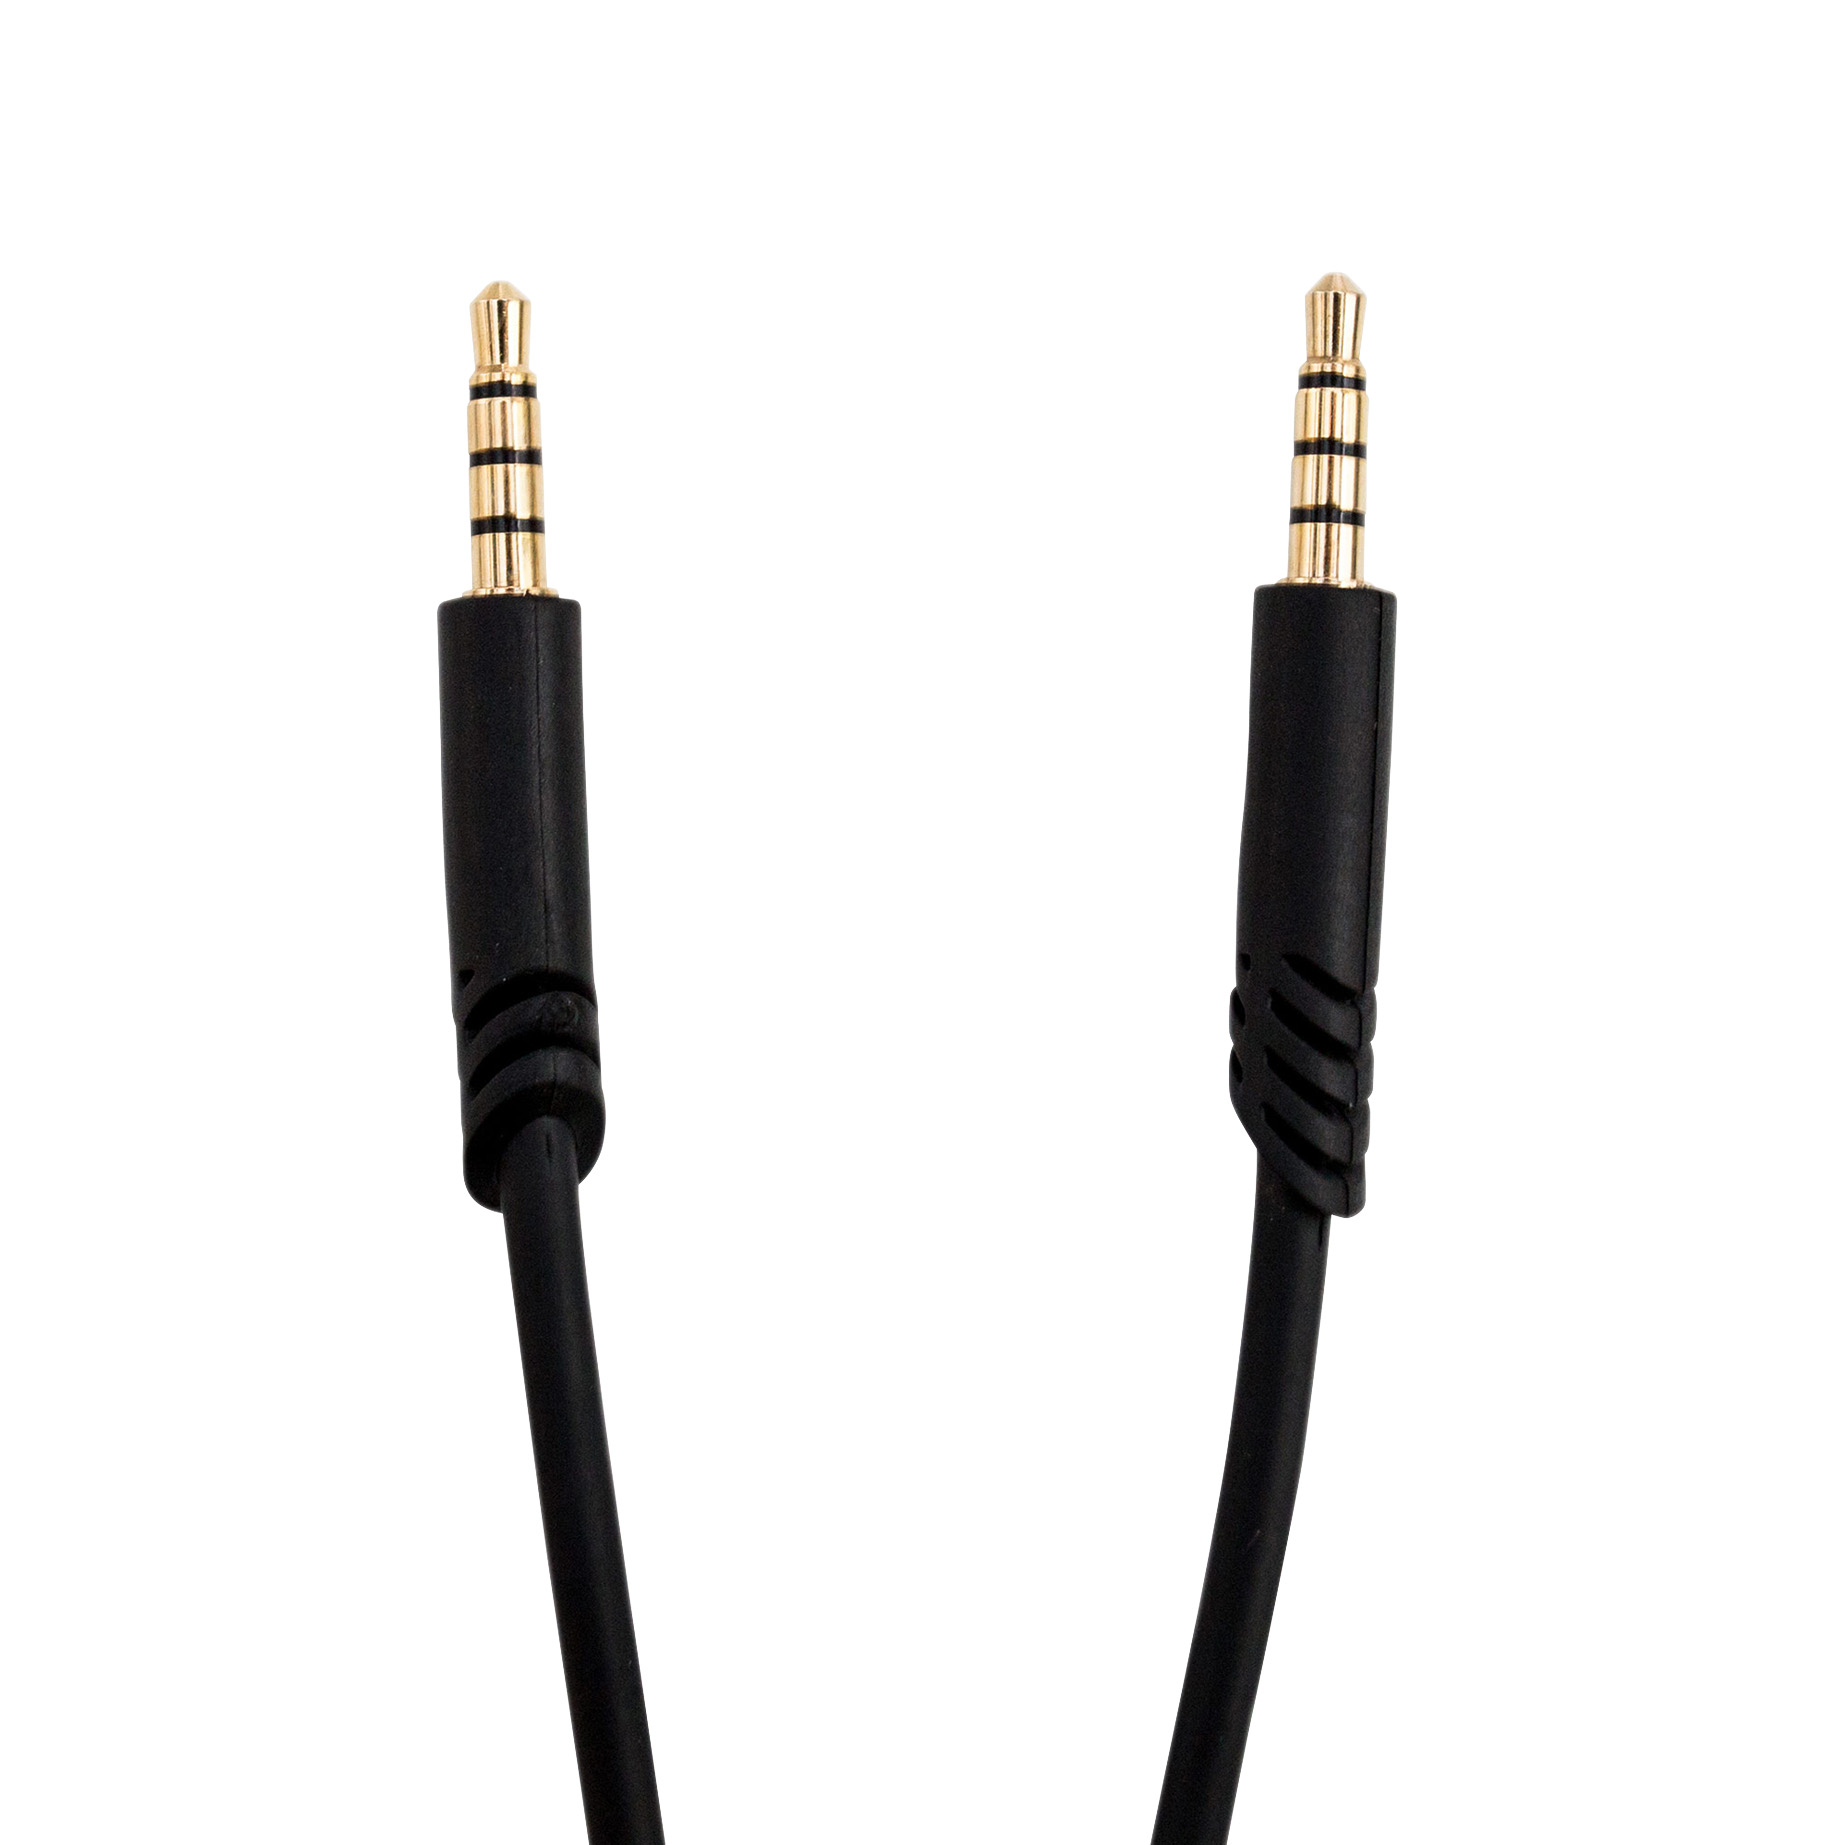 AUX CABLE & MIC  STEREO EARPHONES FOR MOBILE & MP3 ,Cable